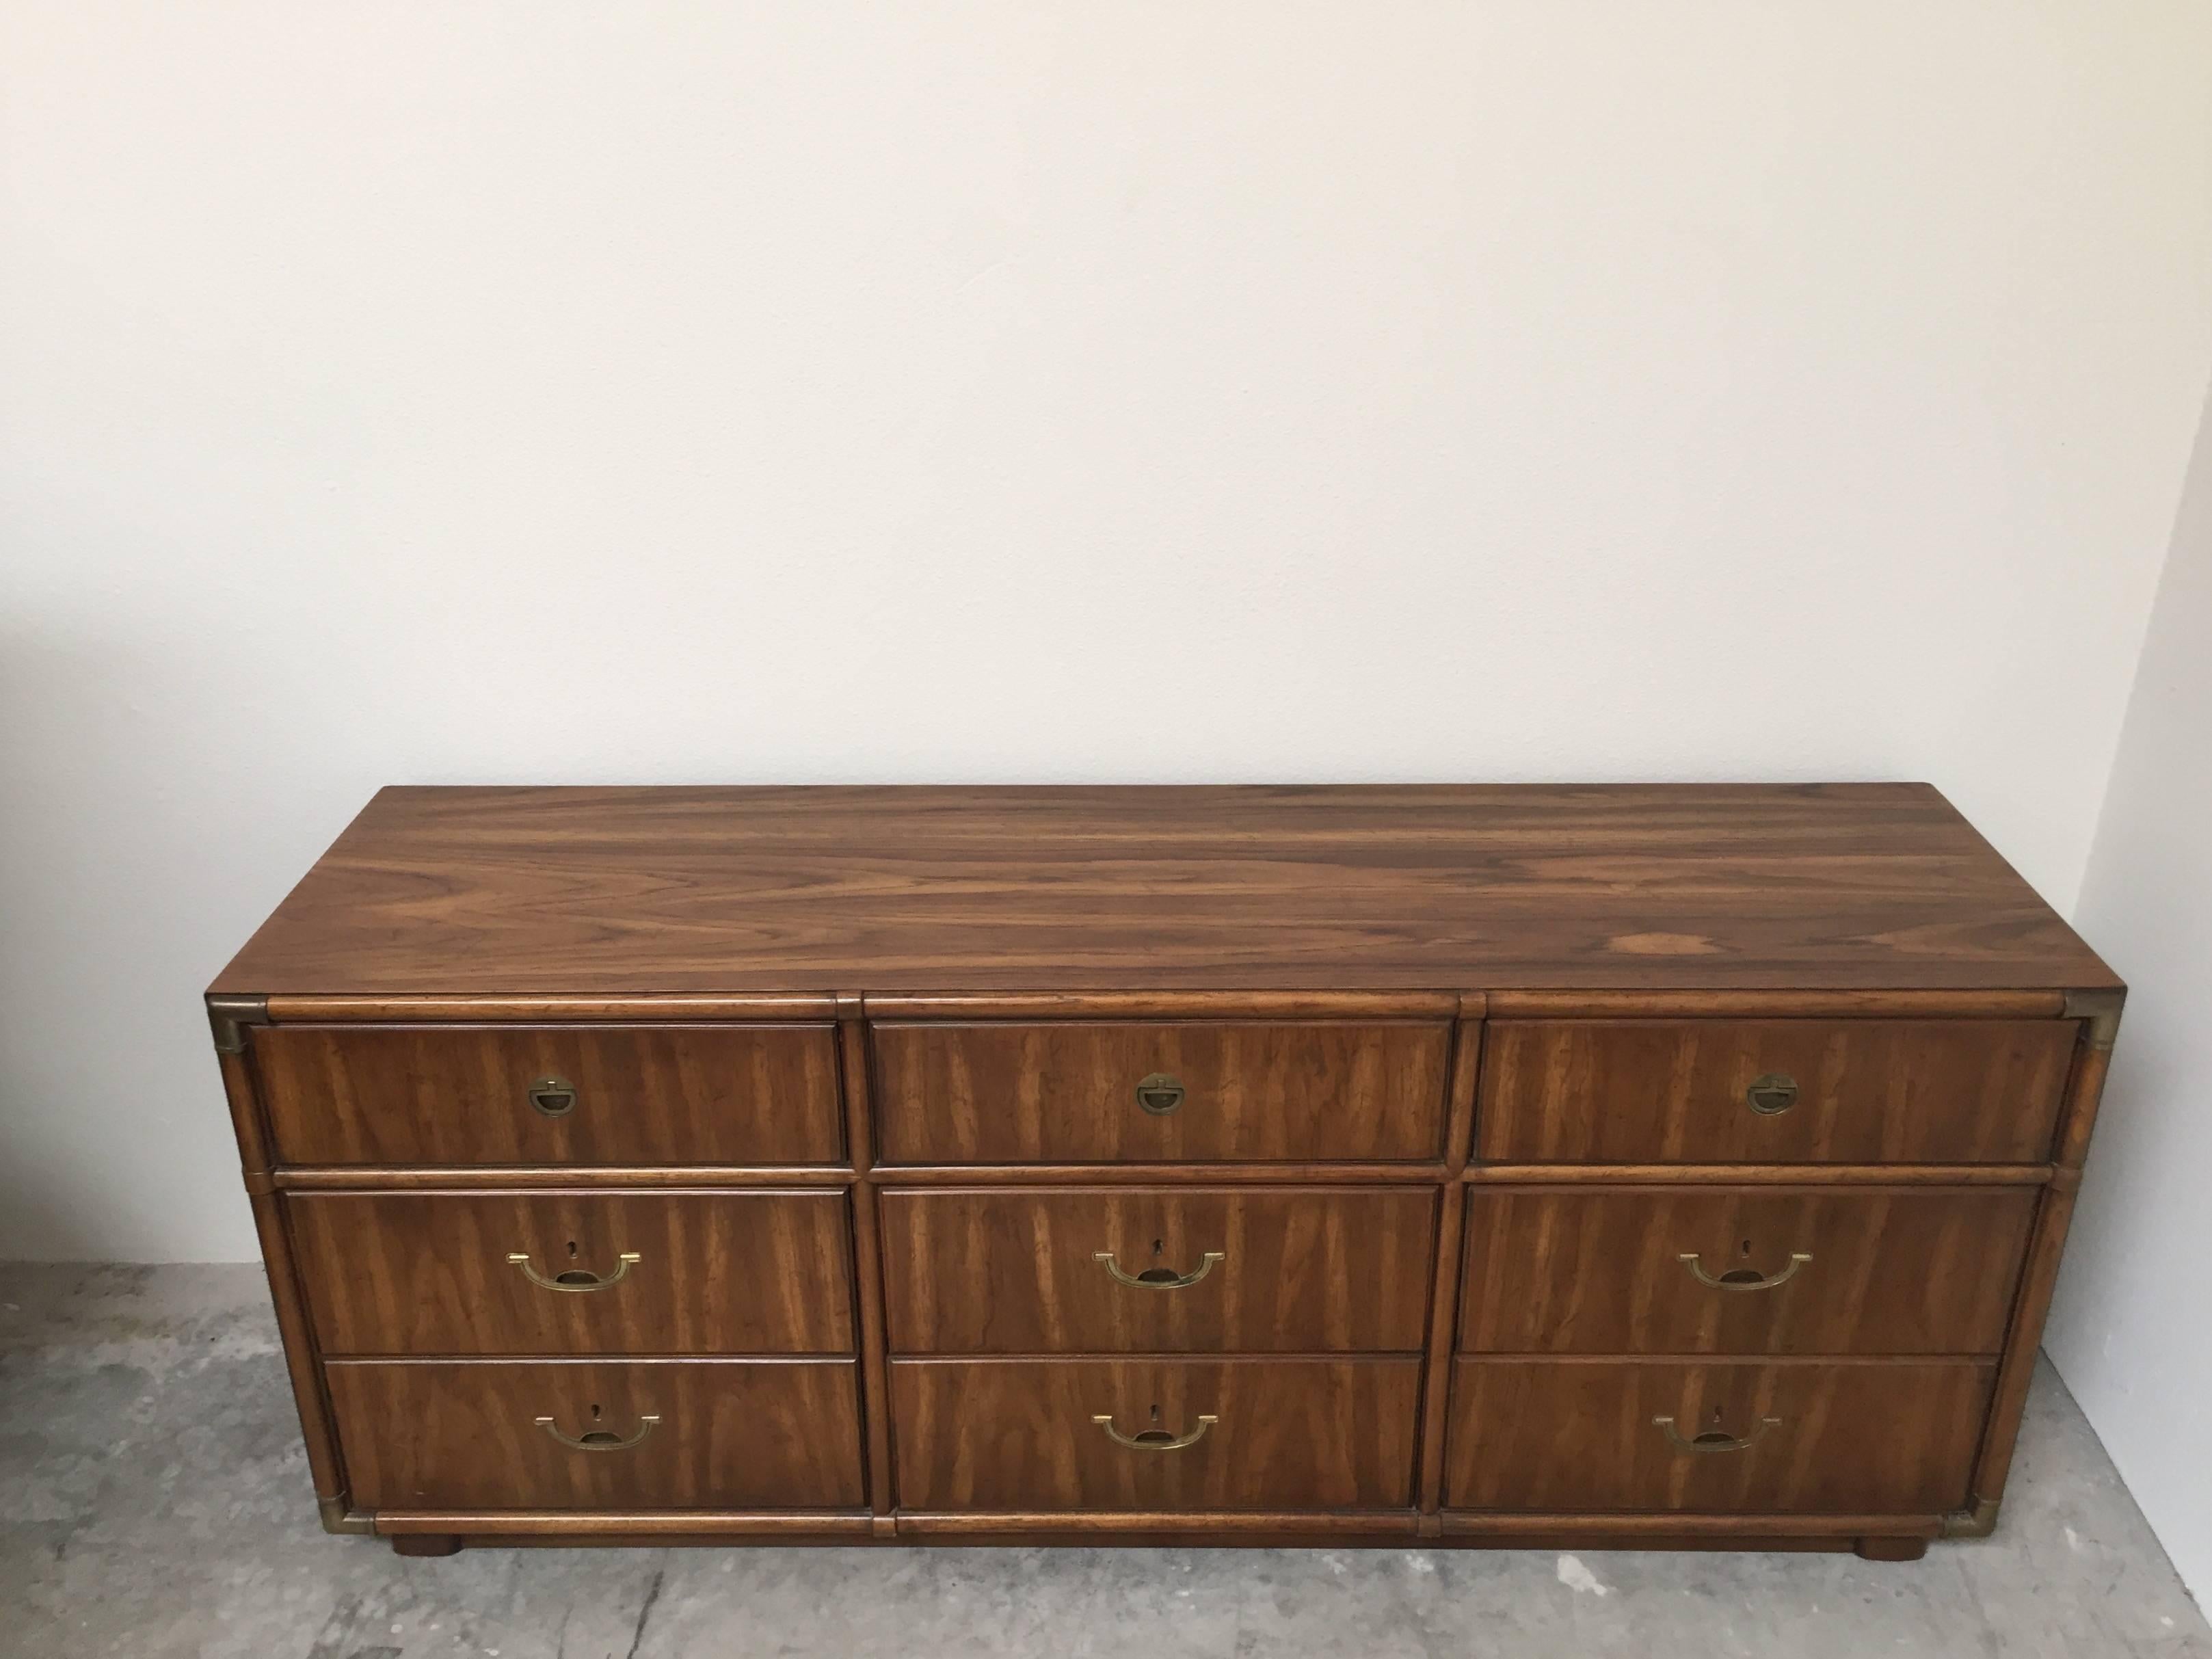 Campaign Style Nine-Drawer Dresser by Drexel 4